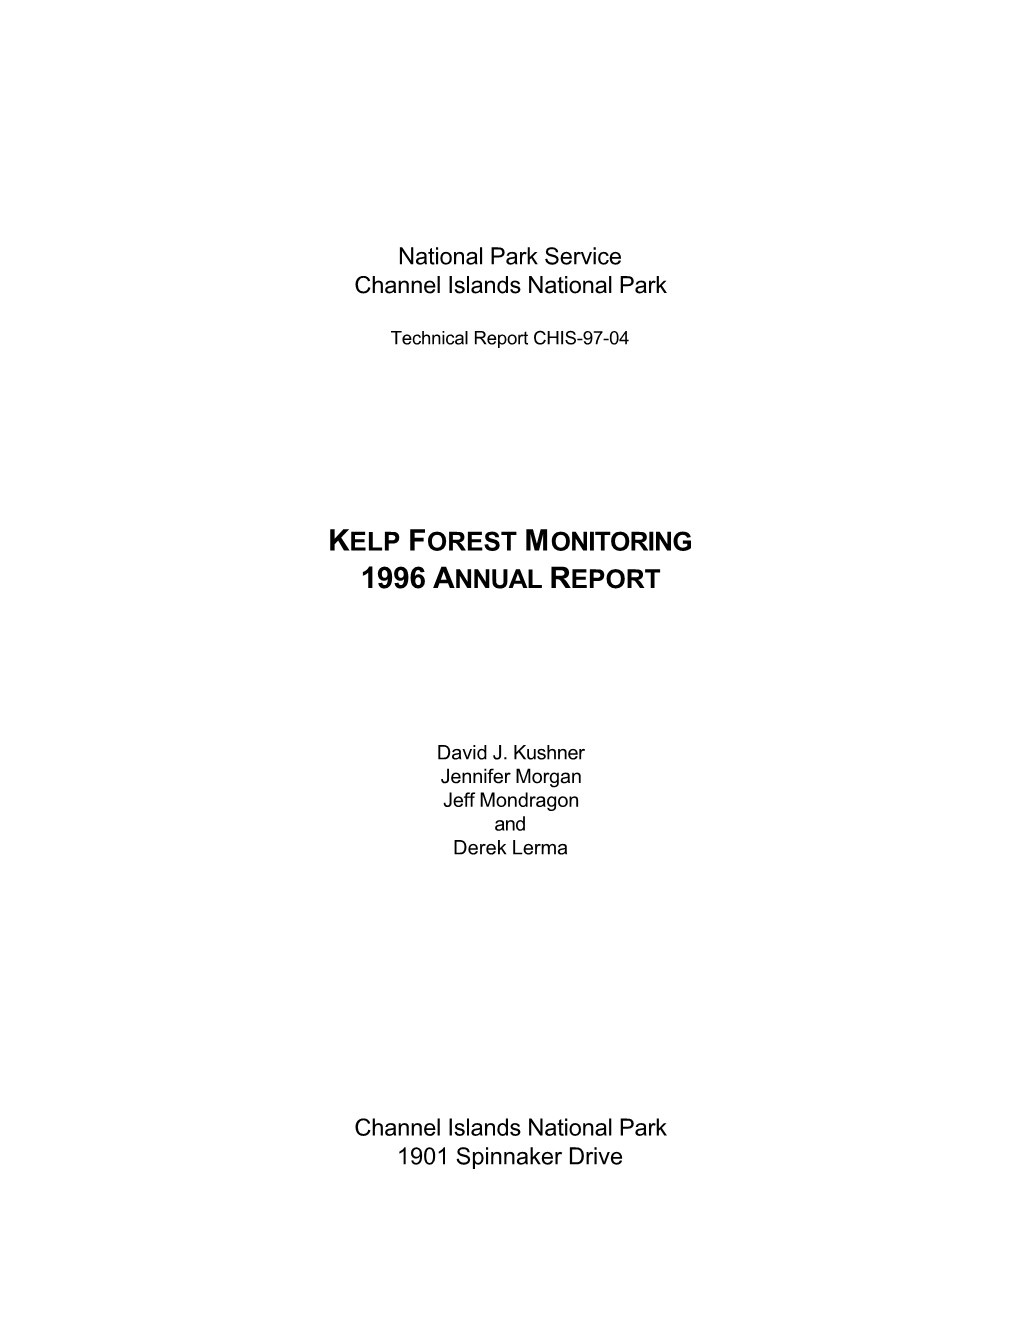 Kelp Forest Monitoring 1996 Annual Report